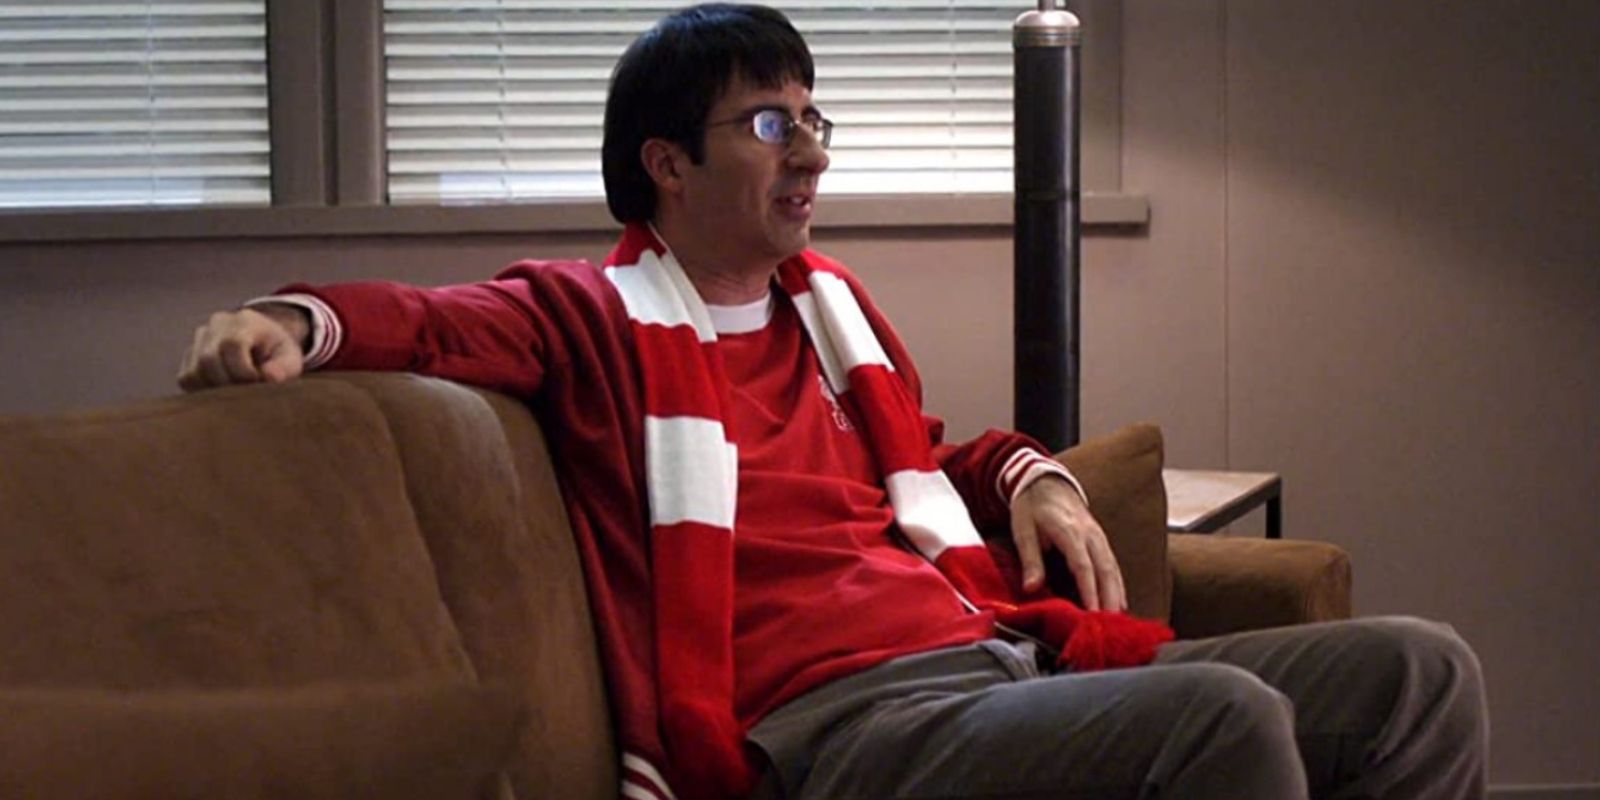 Professor Ian Duncan Sits on a Couch While Wearing a Red Shirt and Red and White Striped Scarf in Community